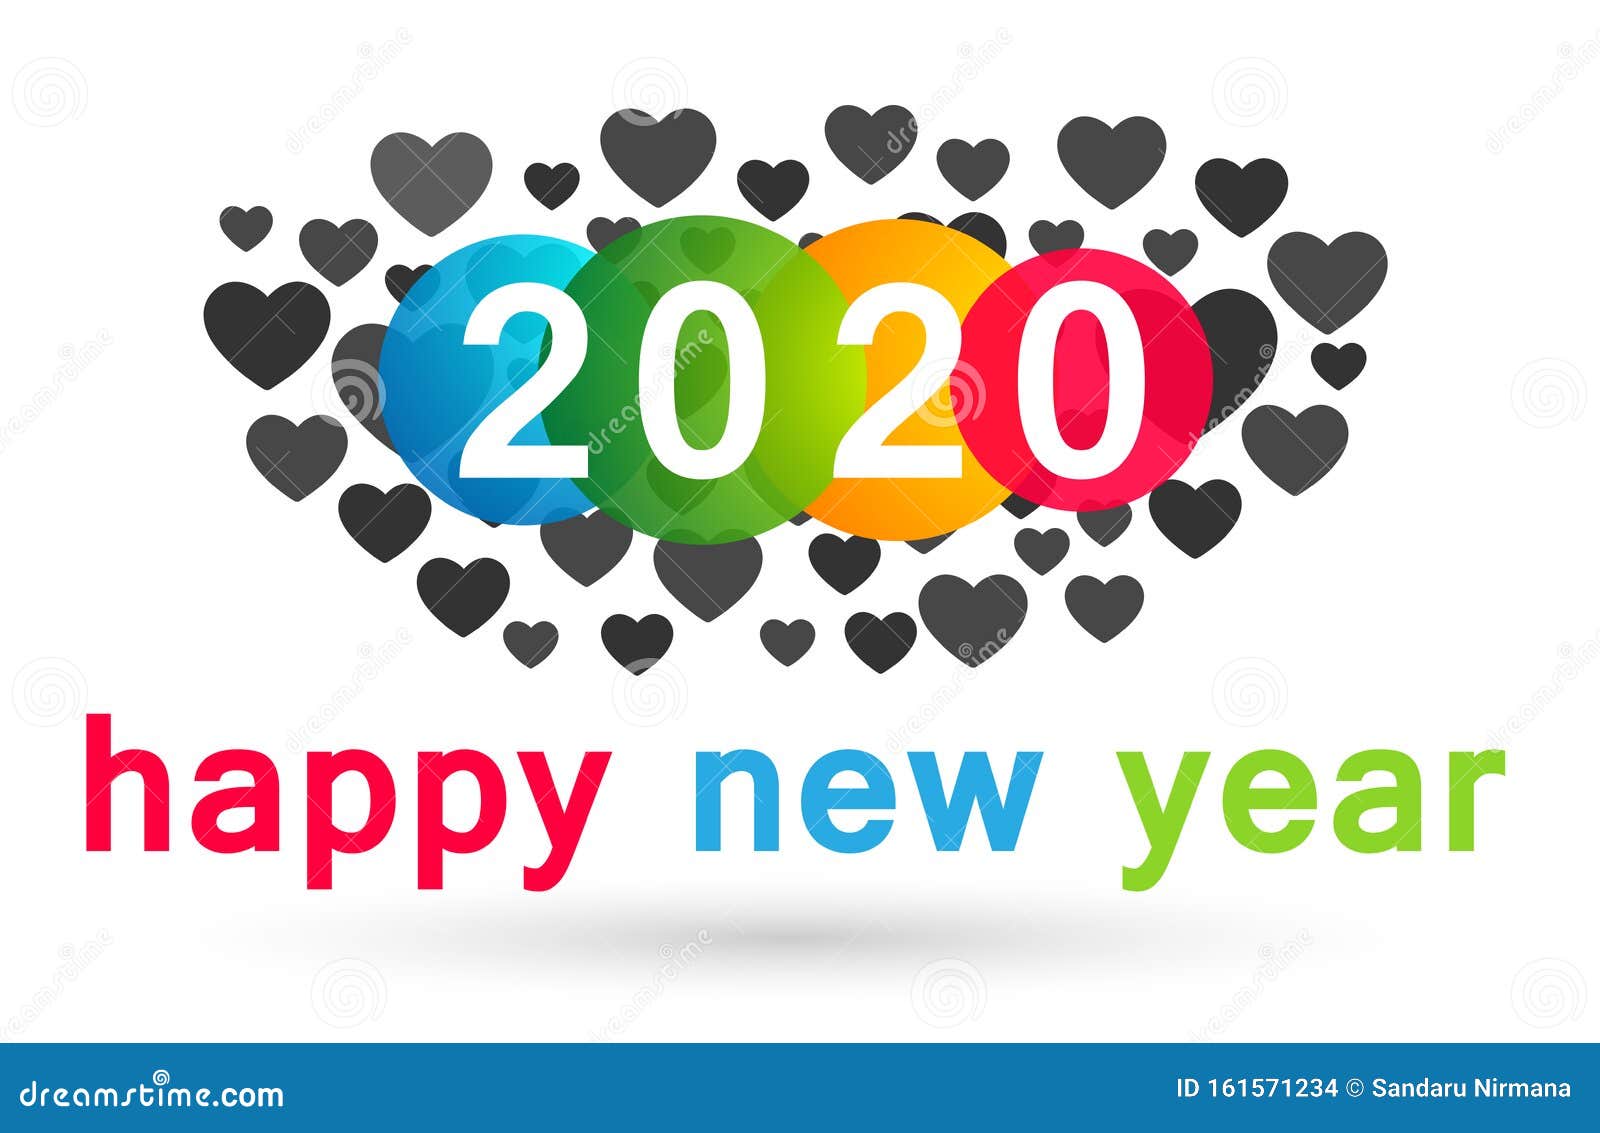 Happy New Year 2020 Card and Heart Love Concept Colorful Greeting ...